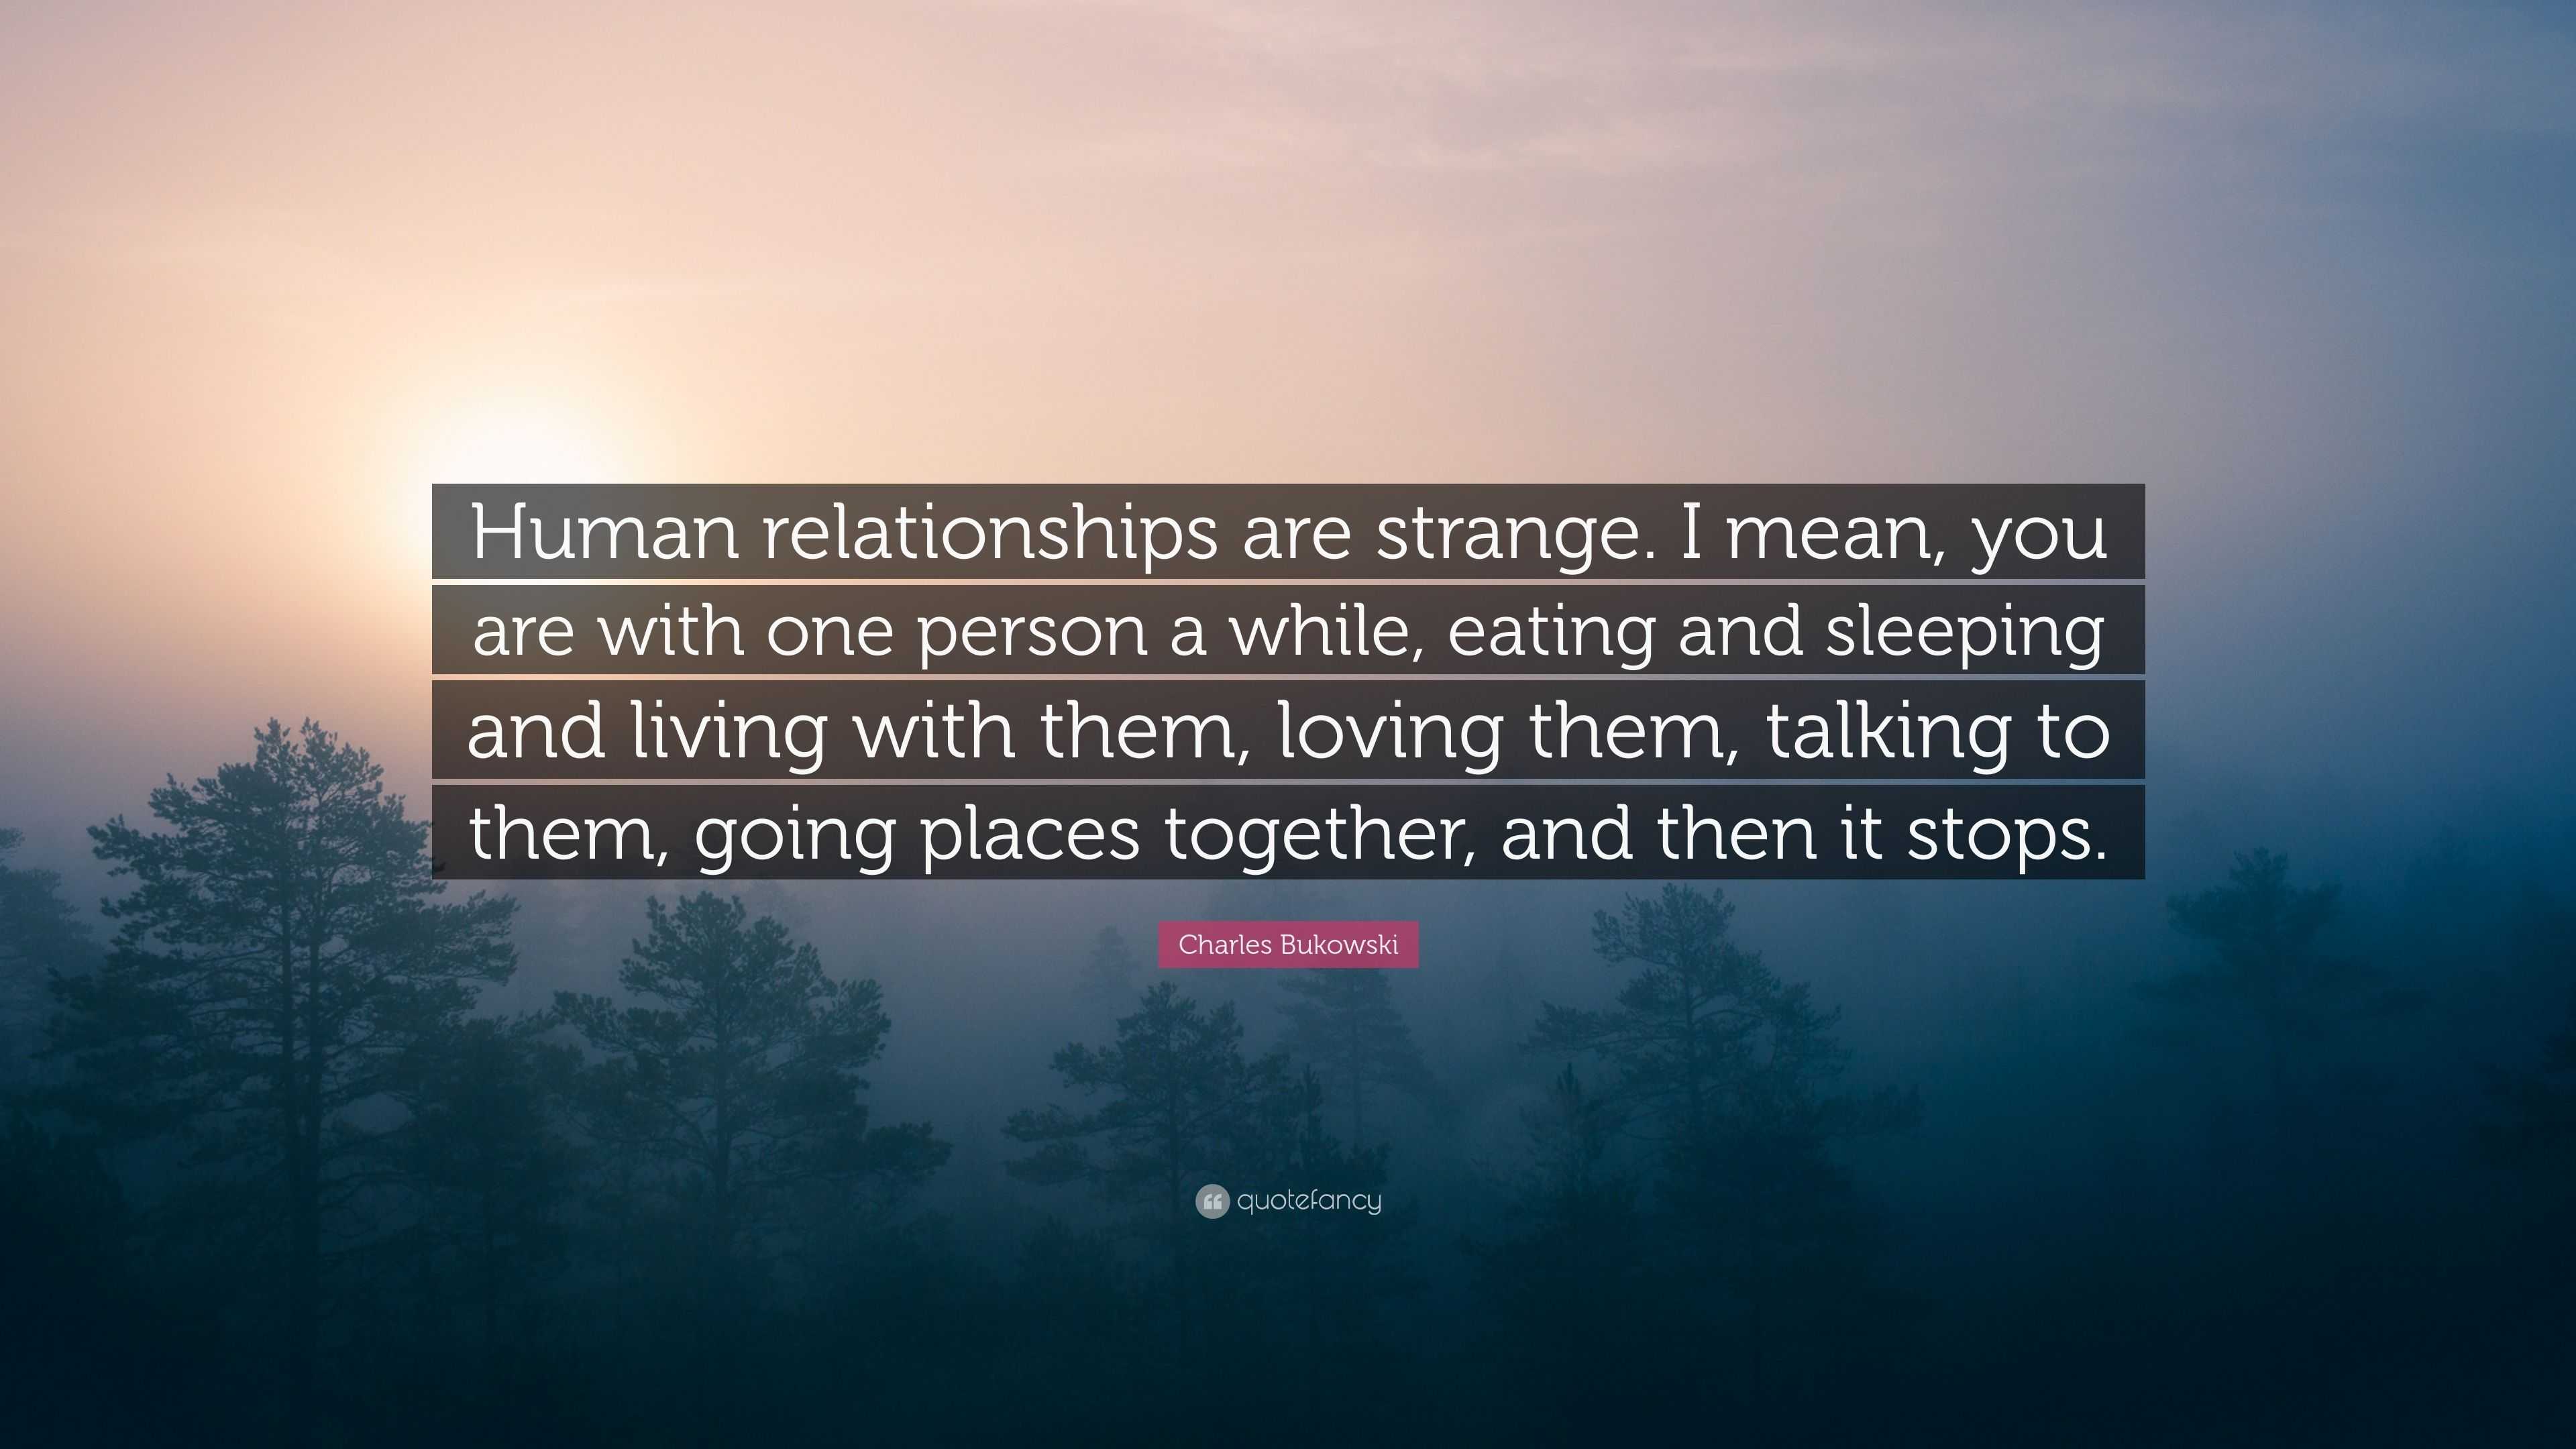 2138083 Charles Bukowski Quote Human relationships are strange I mean you